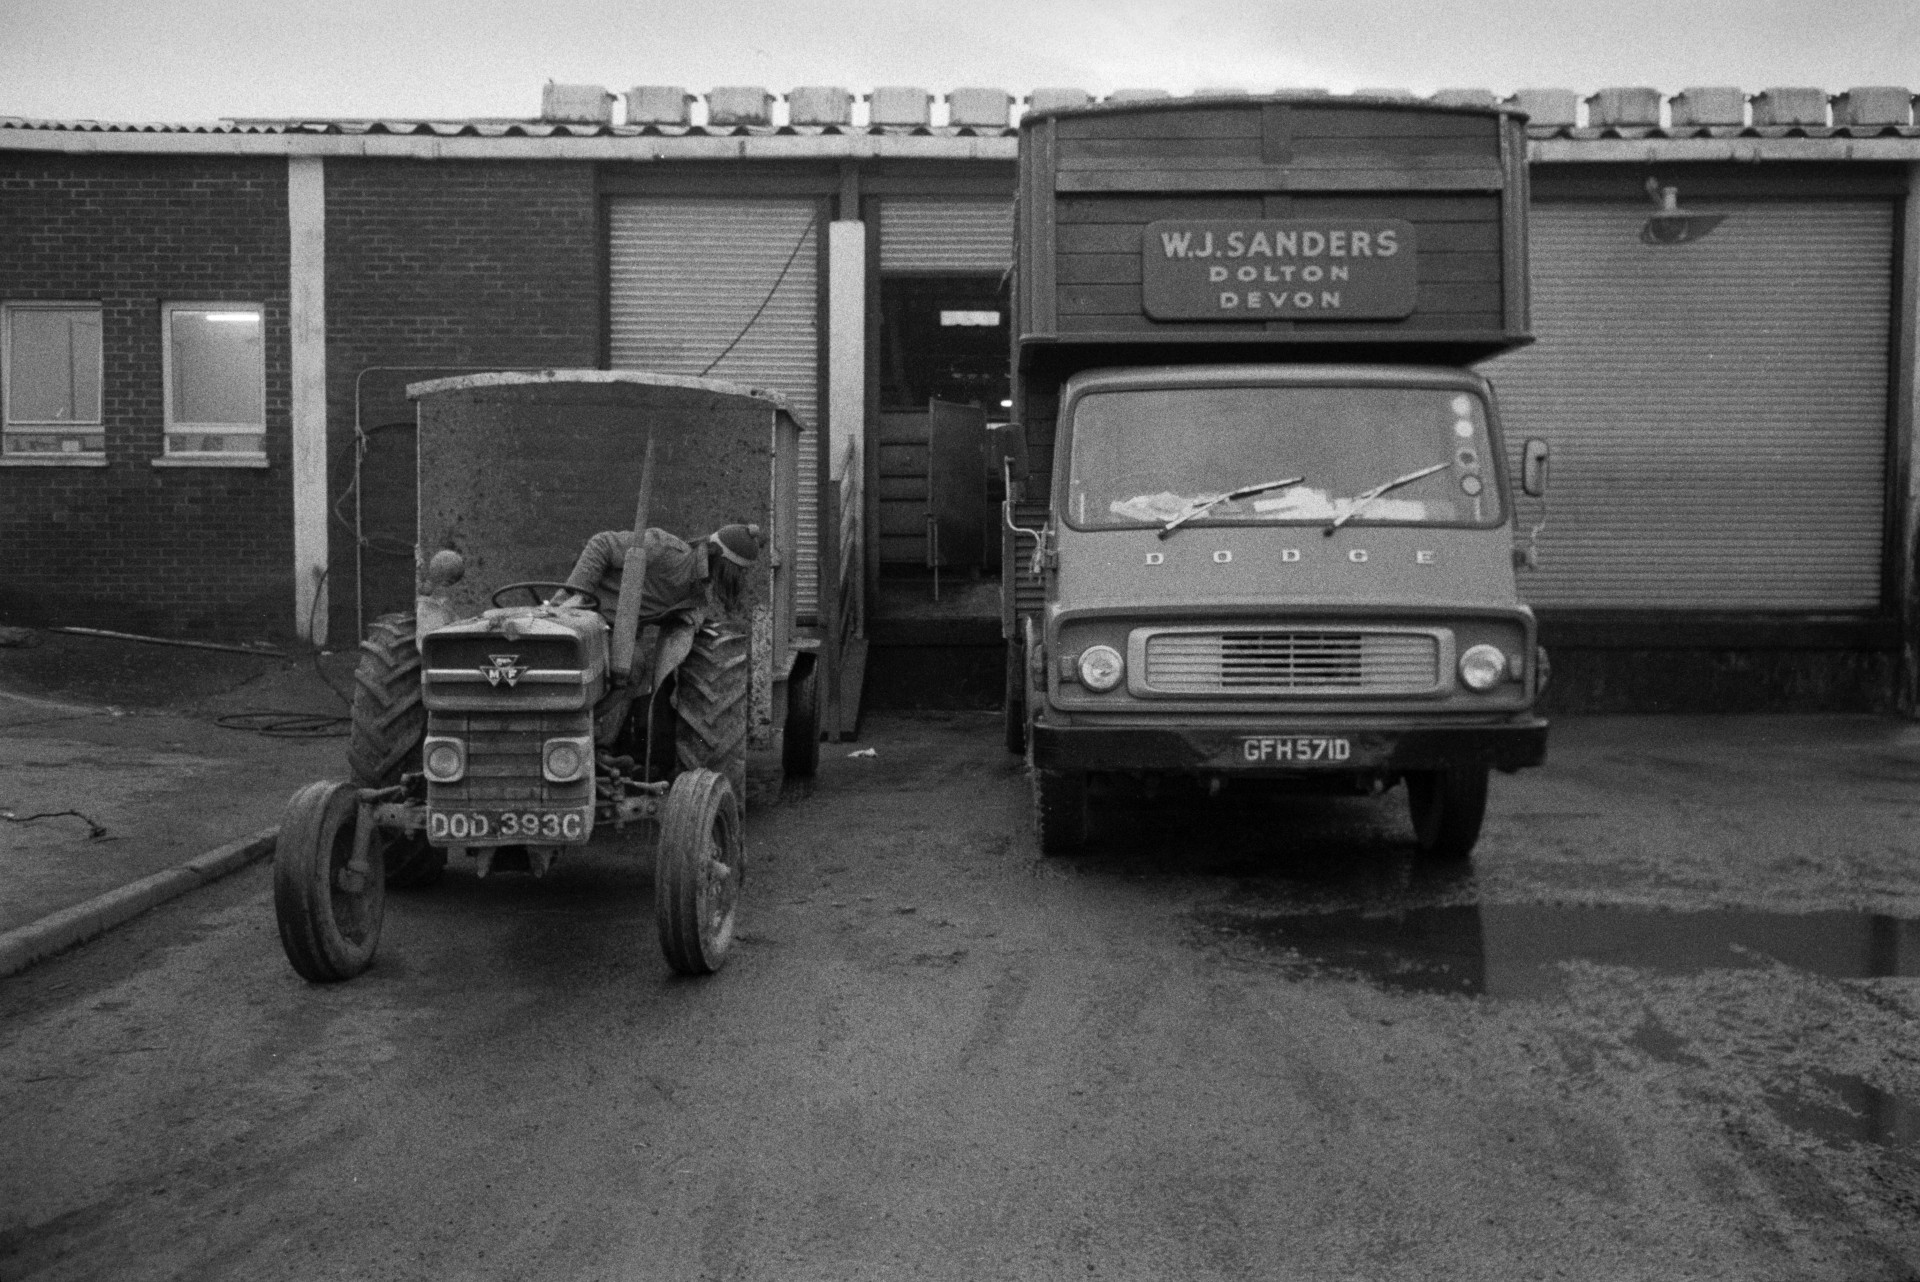 Derek Bright driving a tractor and trailer with sheep to be slaughtered, into the depot of the North Devon Meat Company at Torrington. A W J Sanders of Dolton lorry is parked next to the tractor.